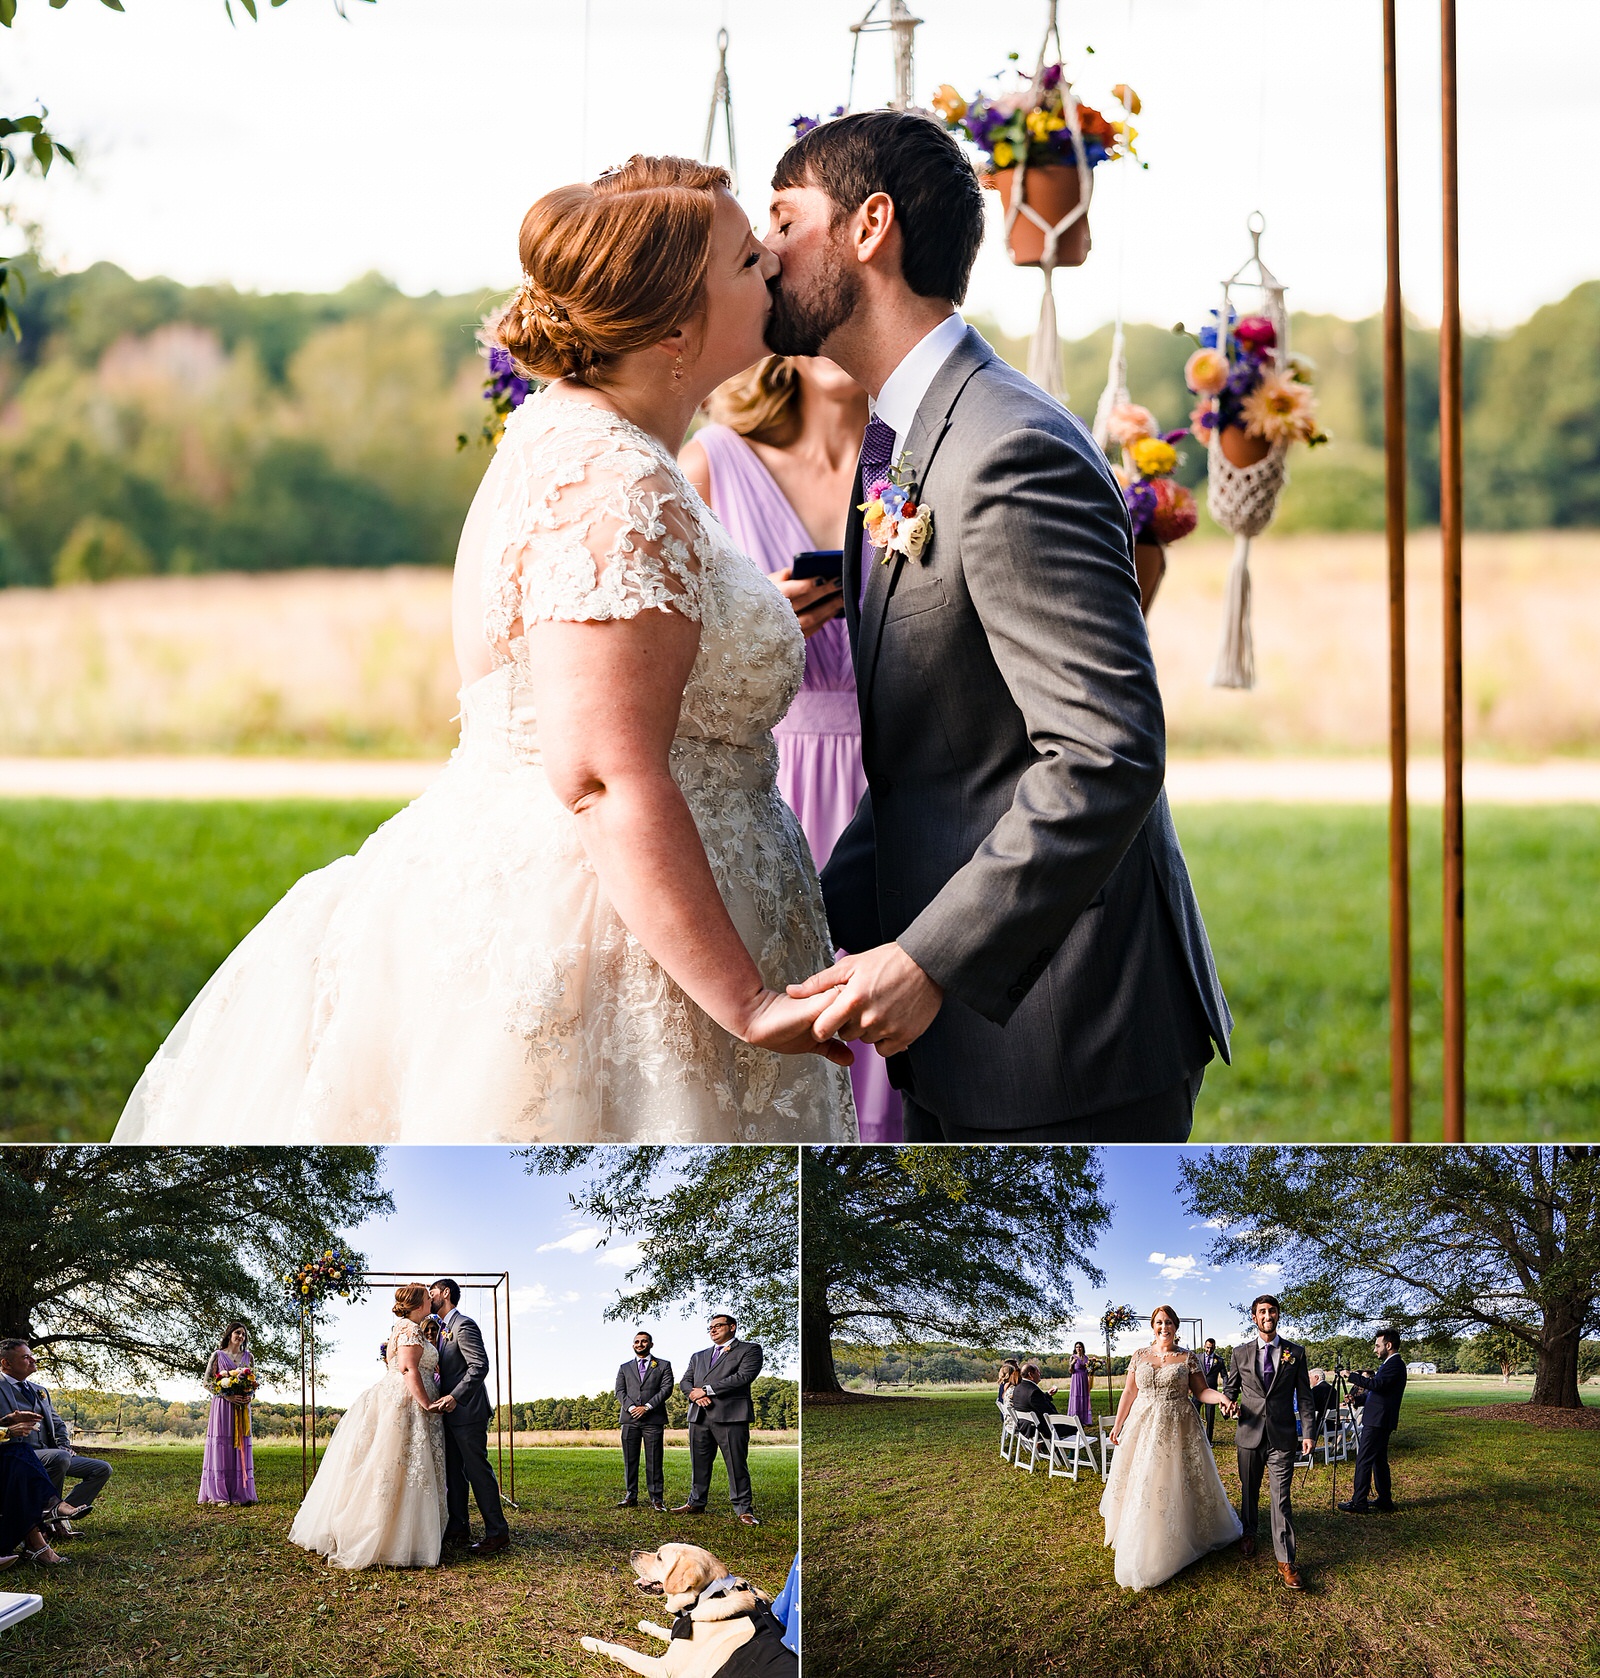 First kiss and recessional at an intimate wedding ceremony